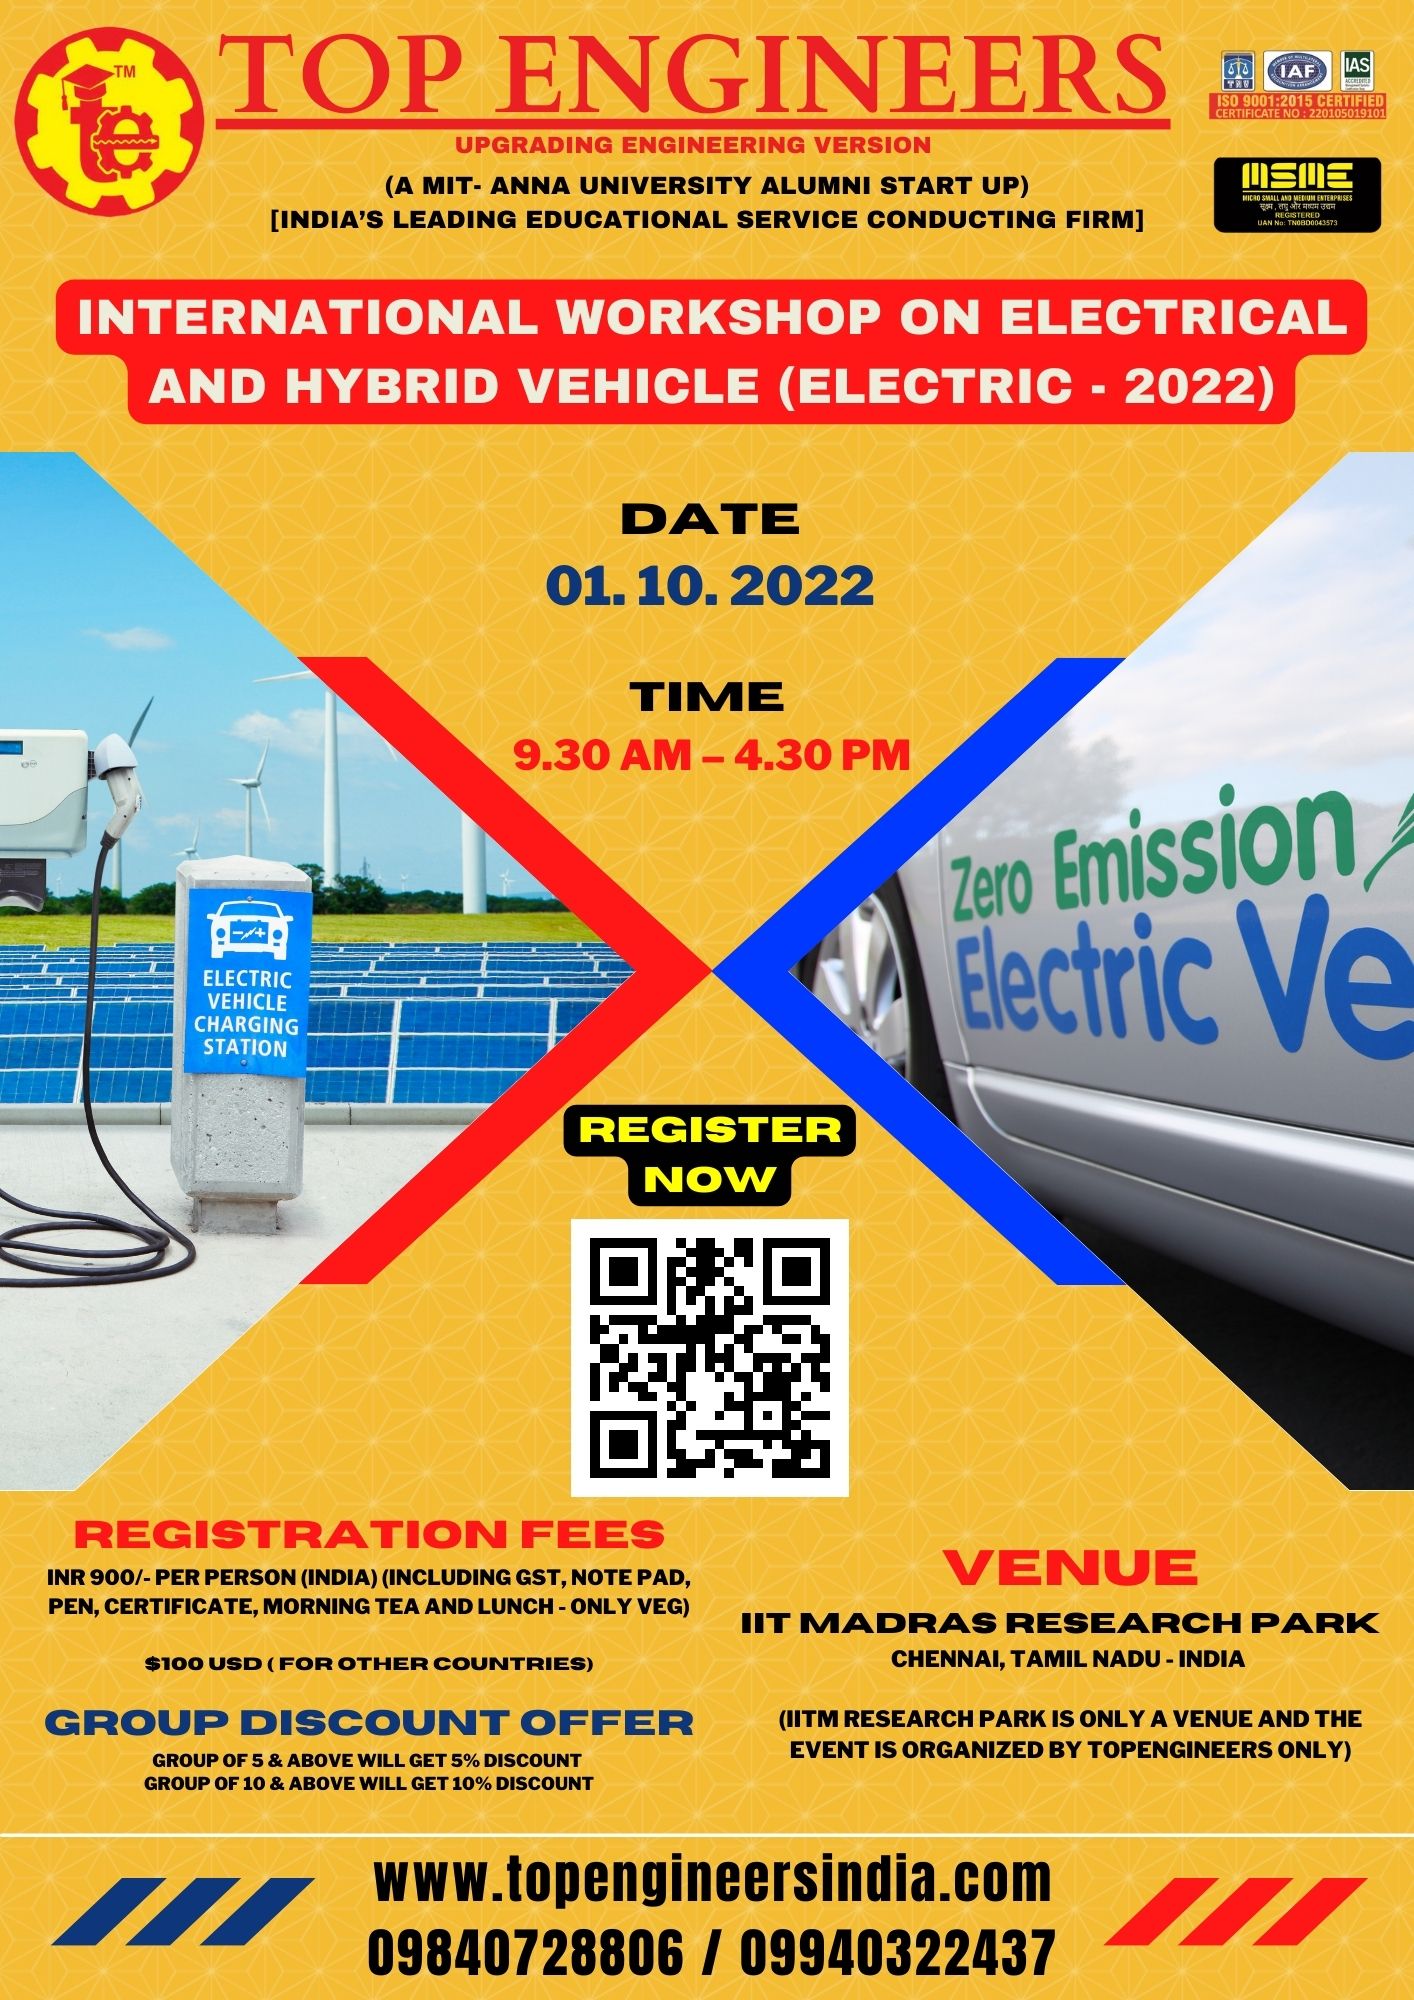 International Workshop on Electric and Hybrid Vehicle (Electric - 2022)